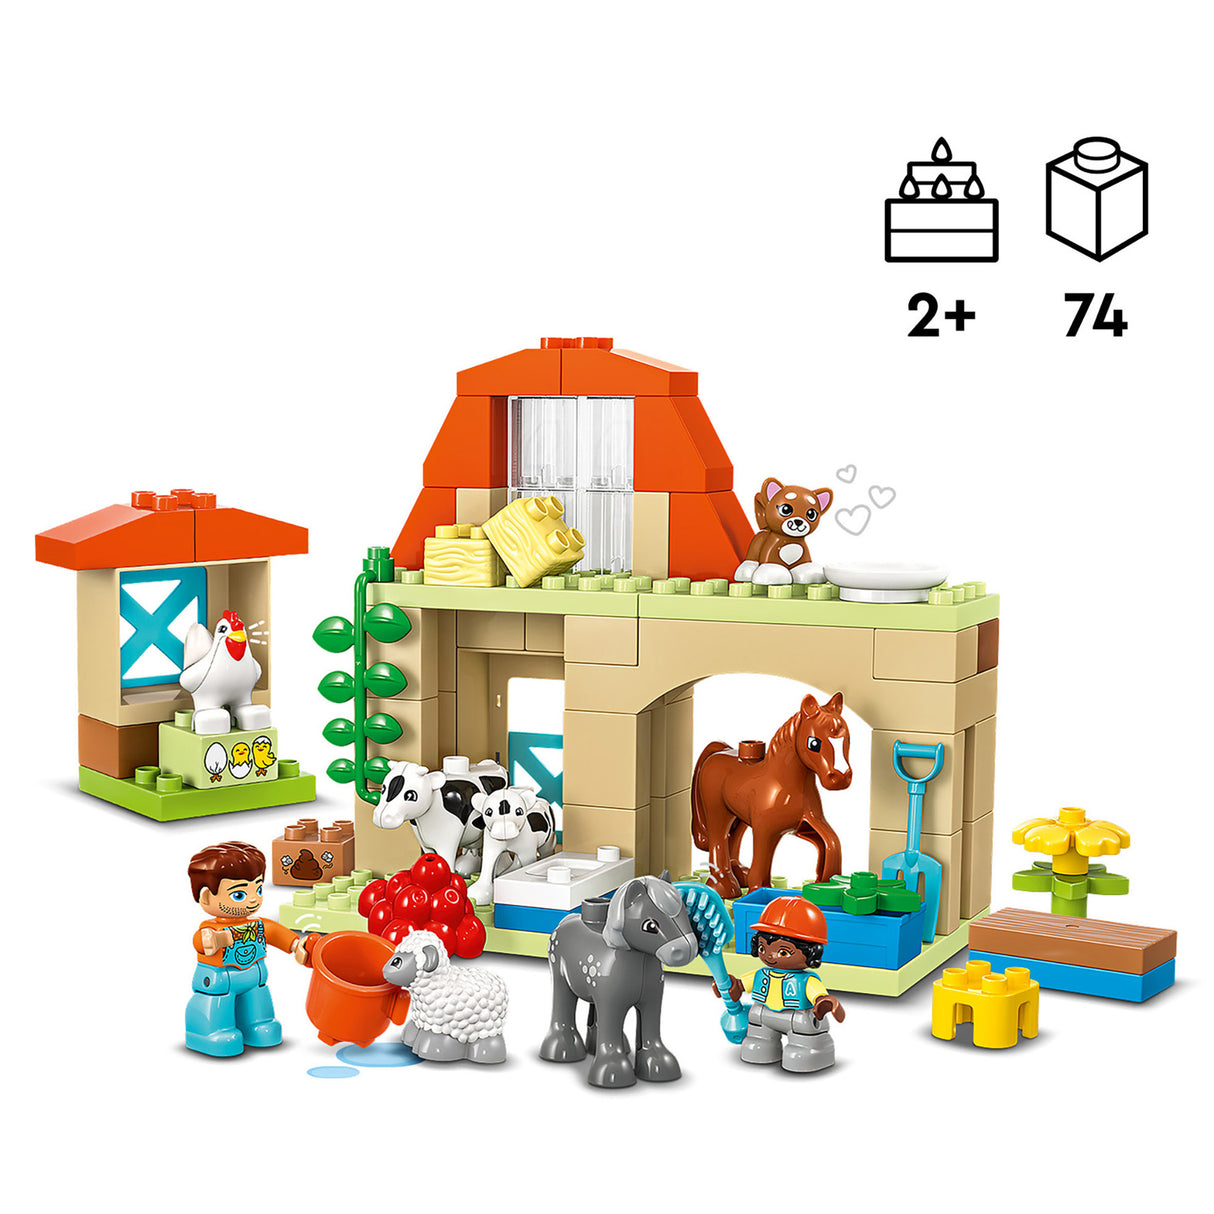 LEGO Duplo Caring for